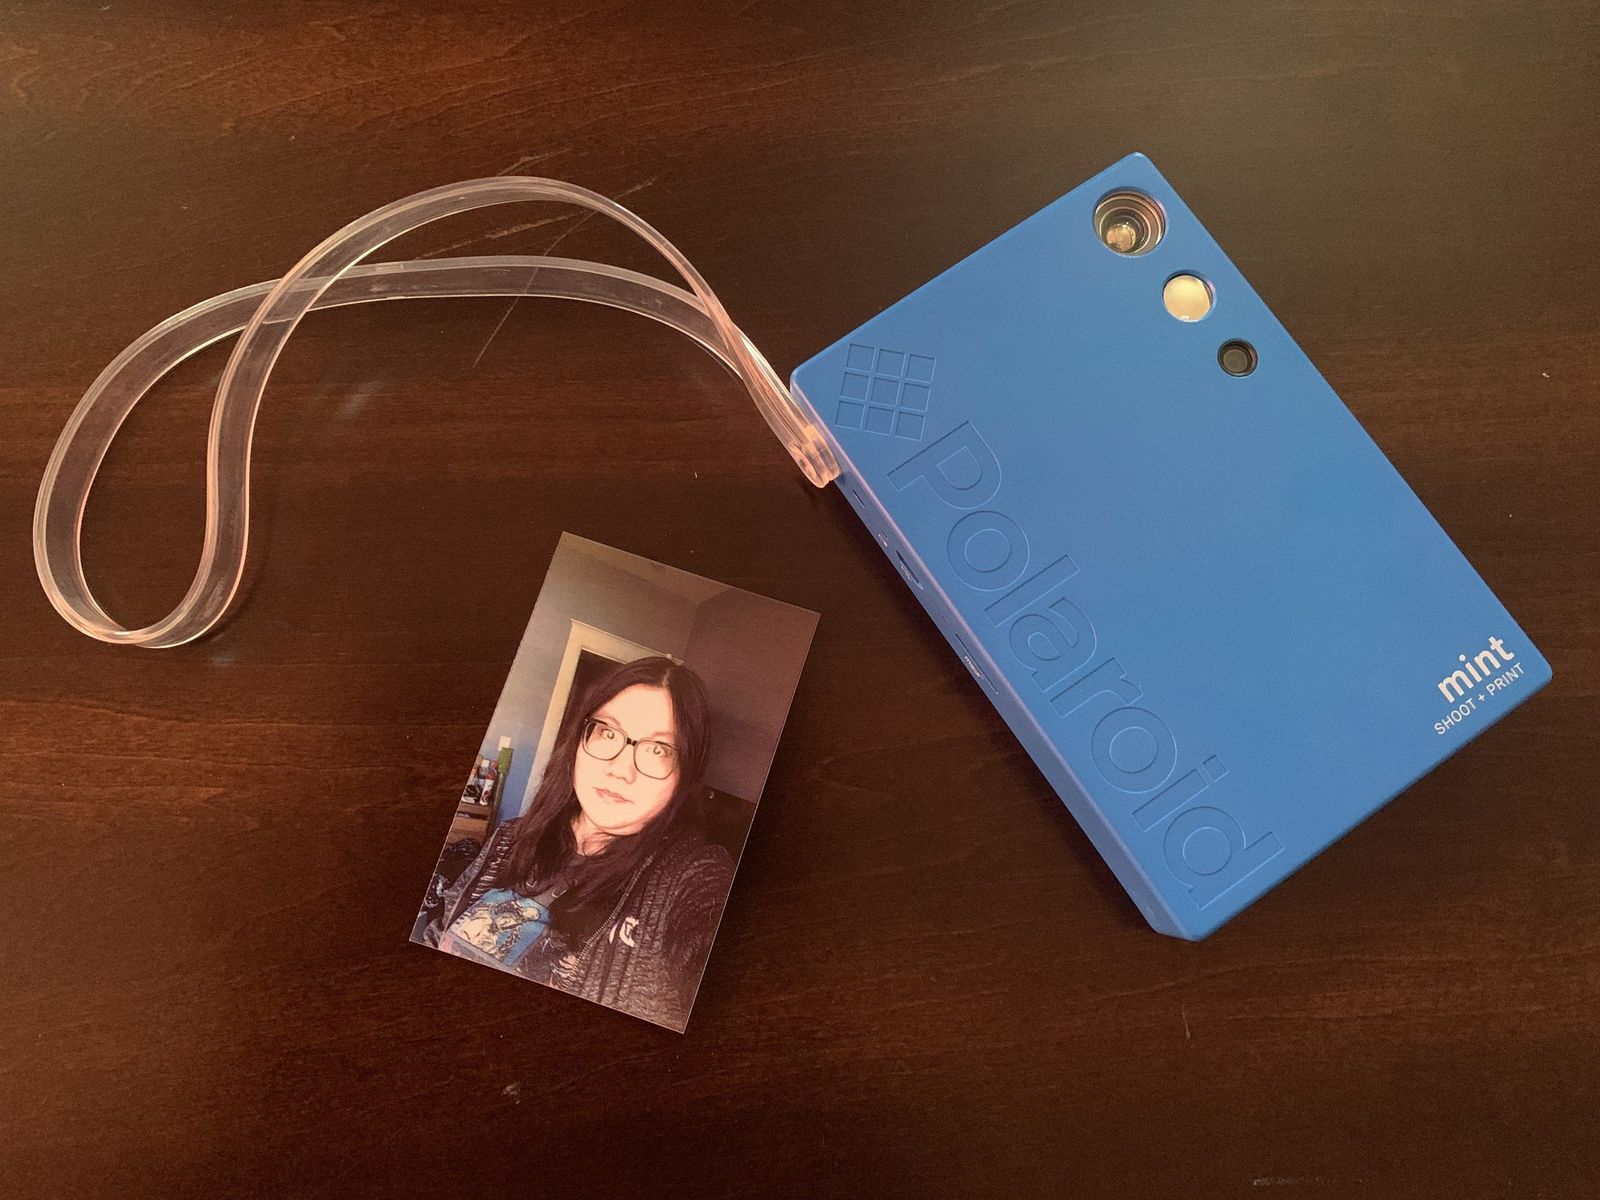 Polaroid Mint Instant Camera & Printer in blue shown with print of Christine Chan